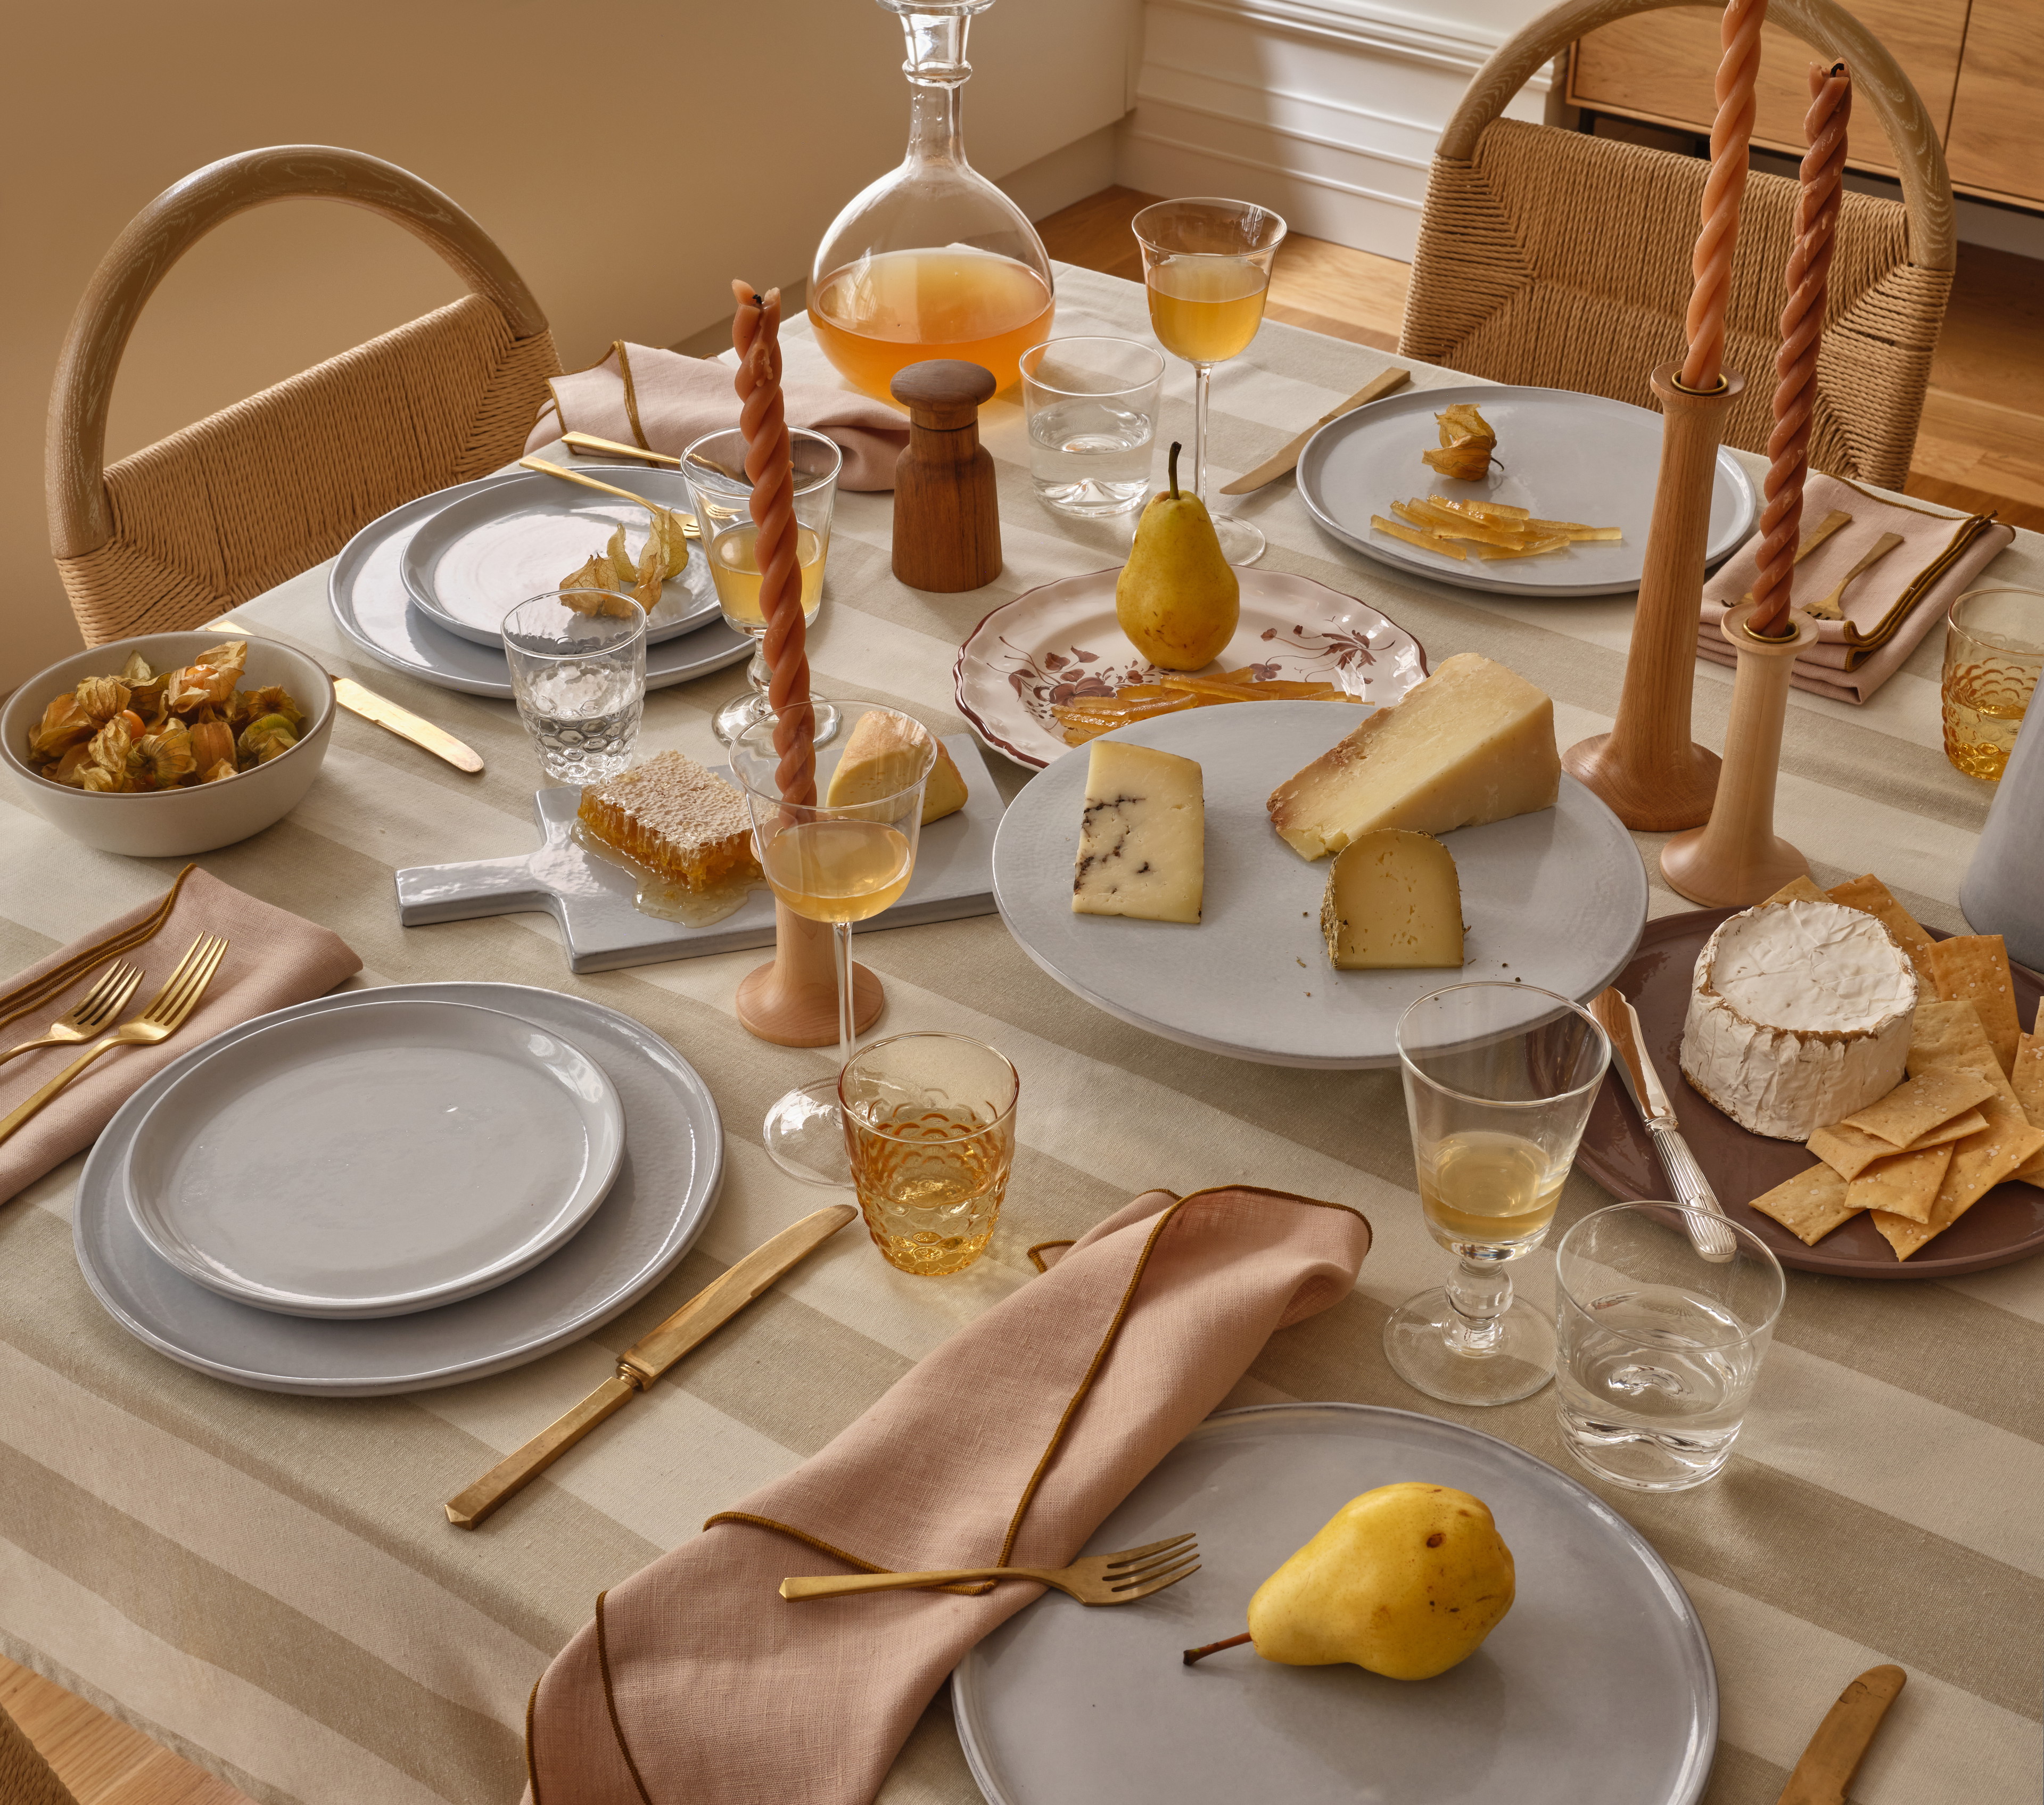 a table set with plates, silverware and a pear